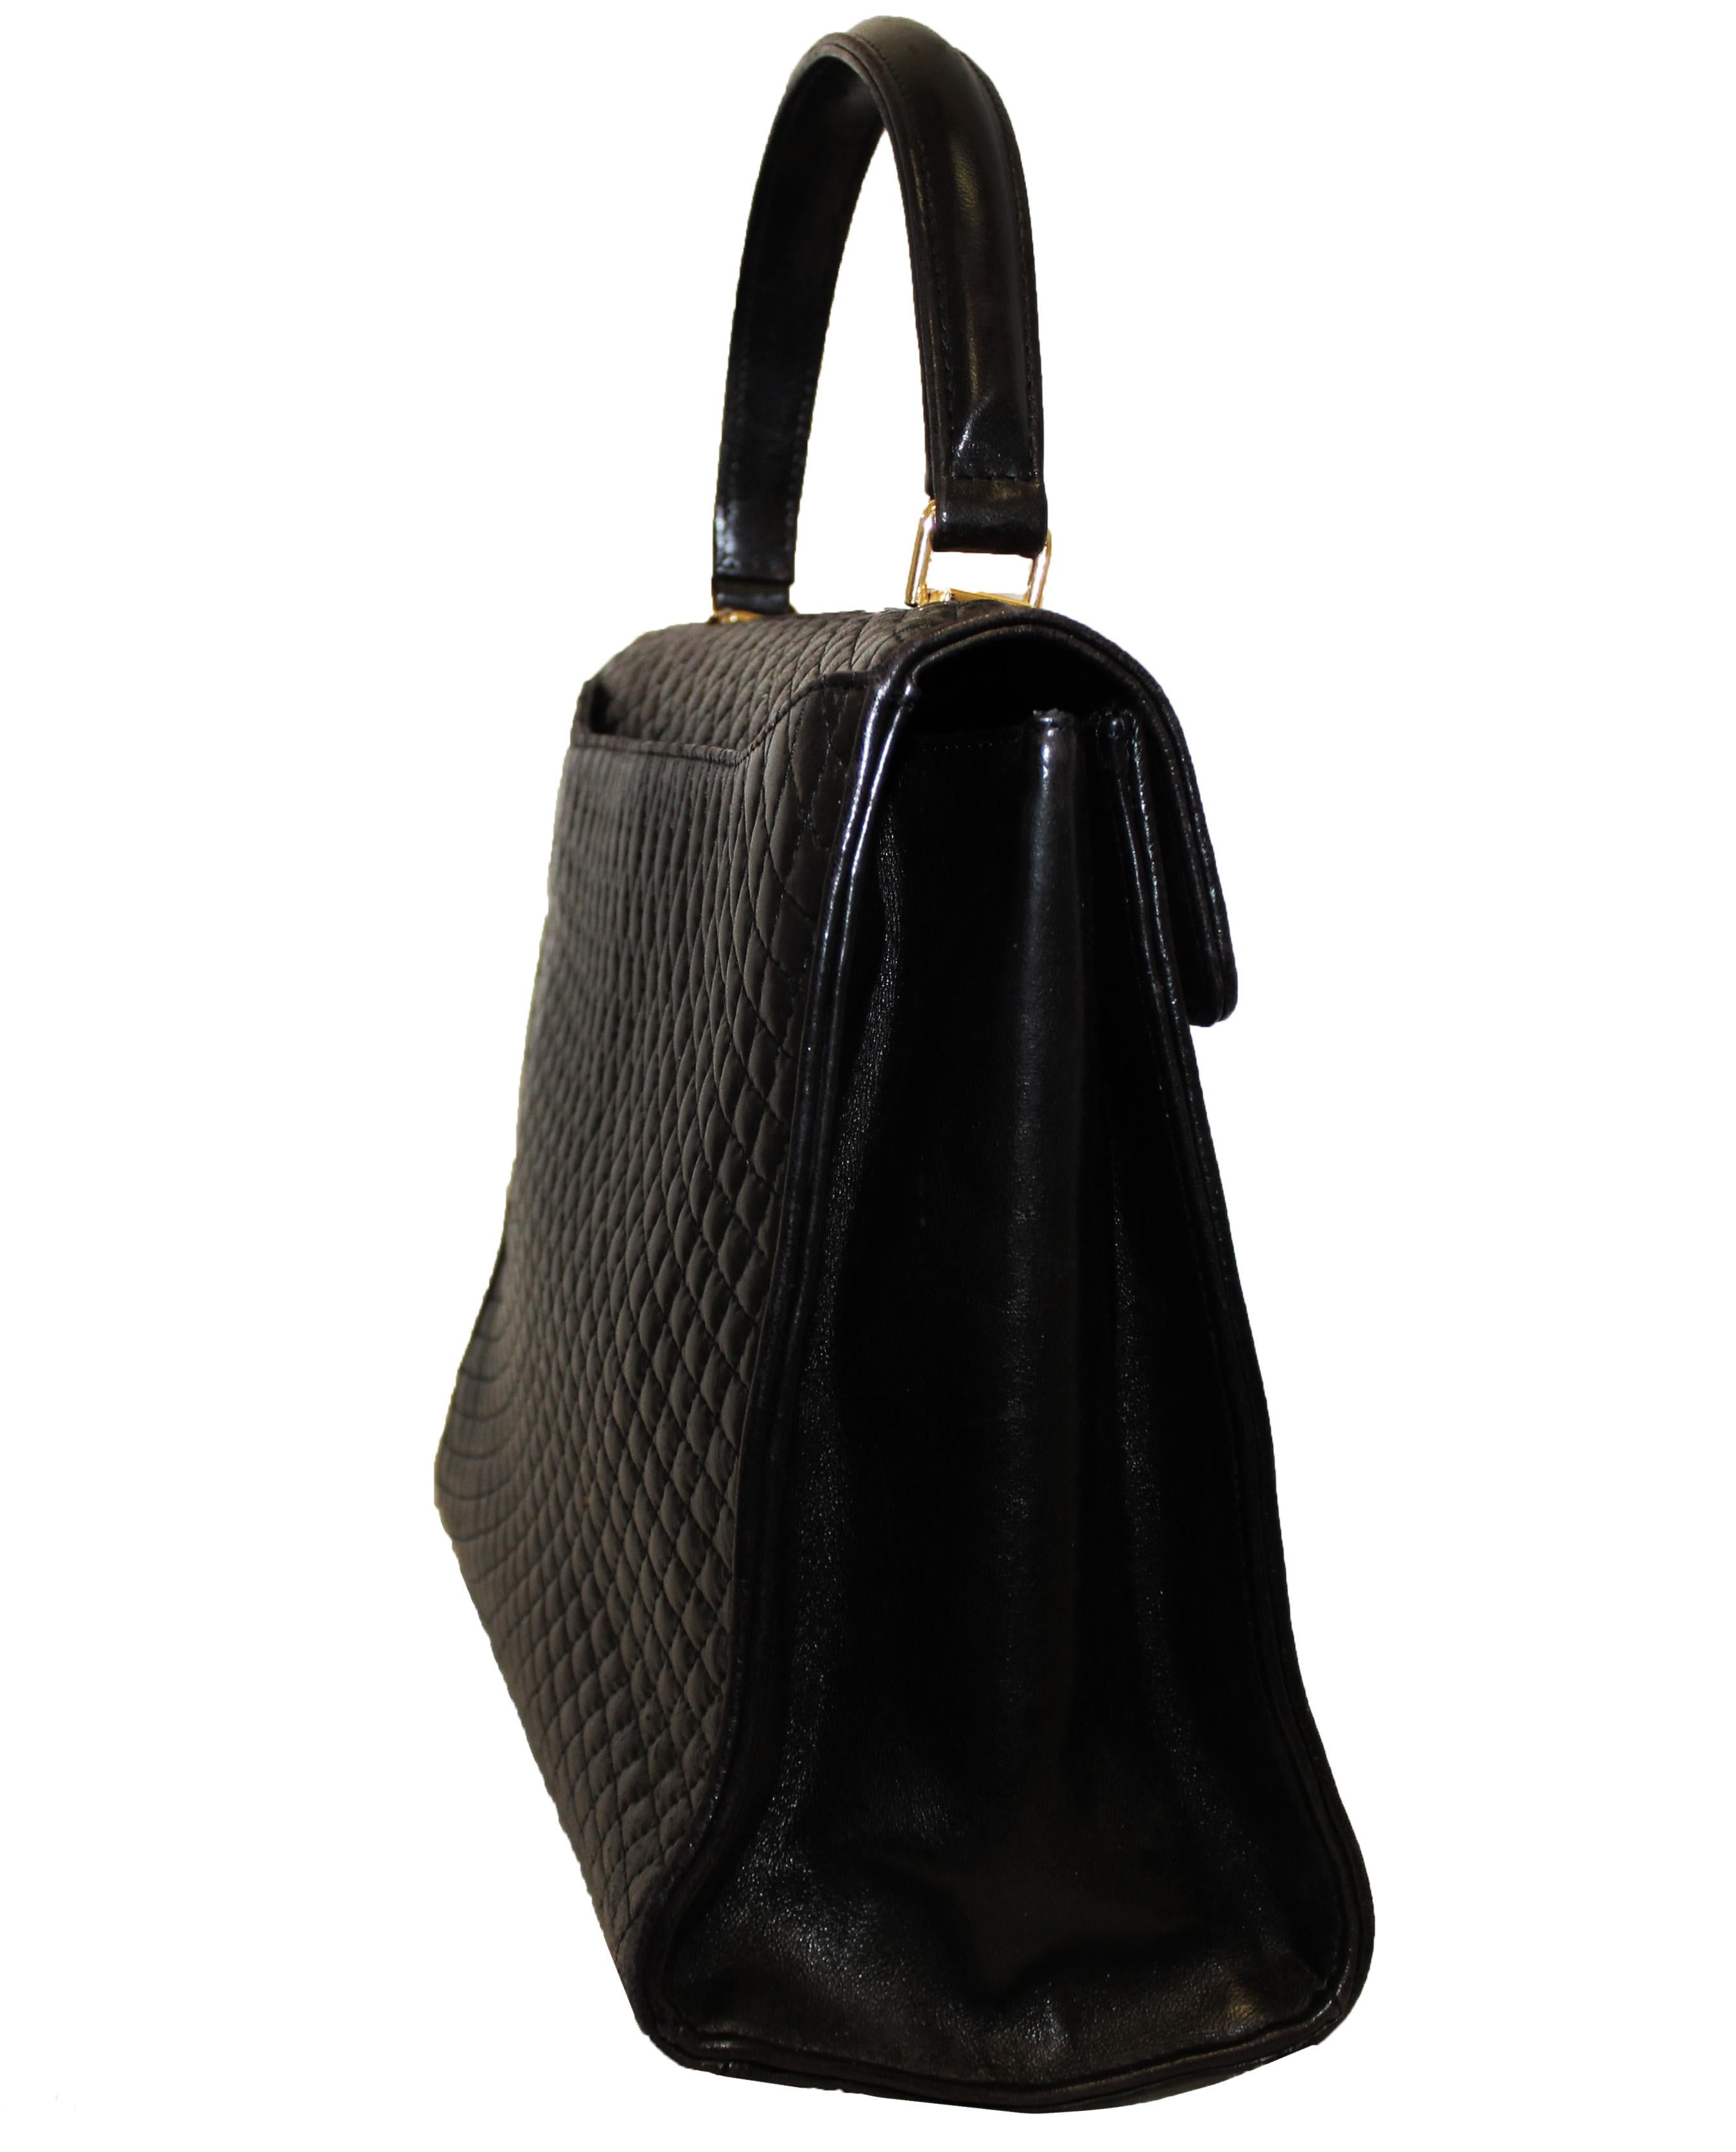 Bally Vintage black top handle bag was created with premium supple leather in a quilted pattern.  With a single flap that contains a covered top handle and for closure a turn lock clasp at flap.  The hardware Is gold tone. One exterior open slit